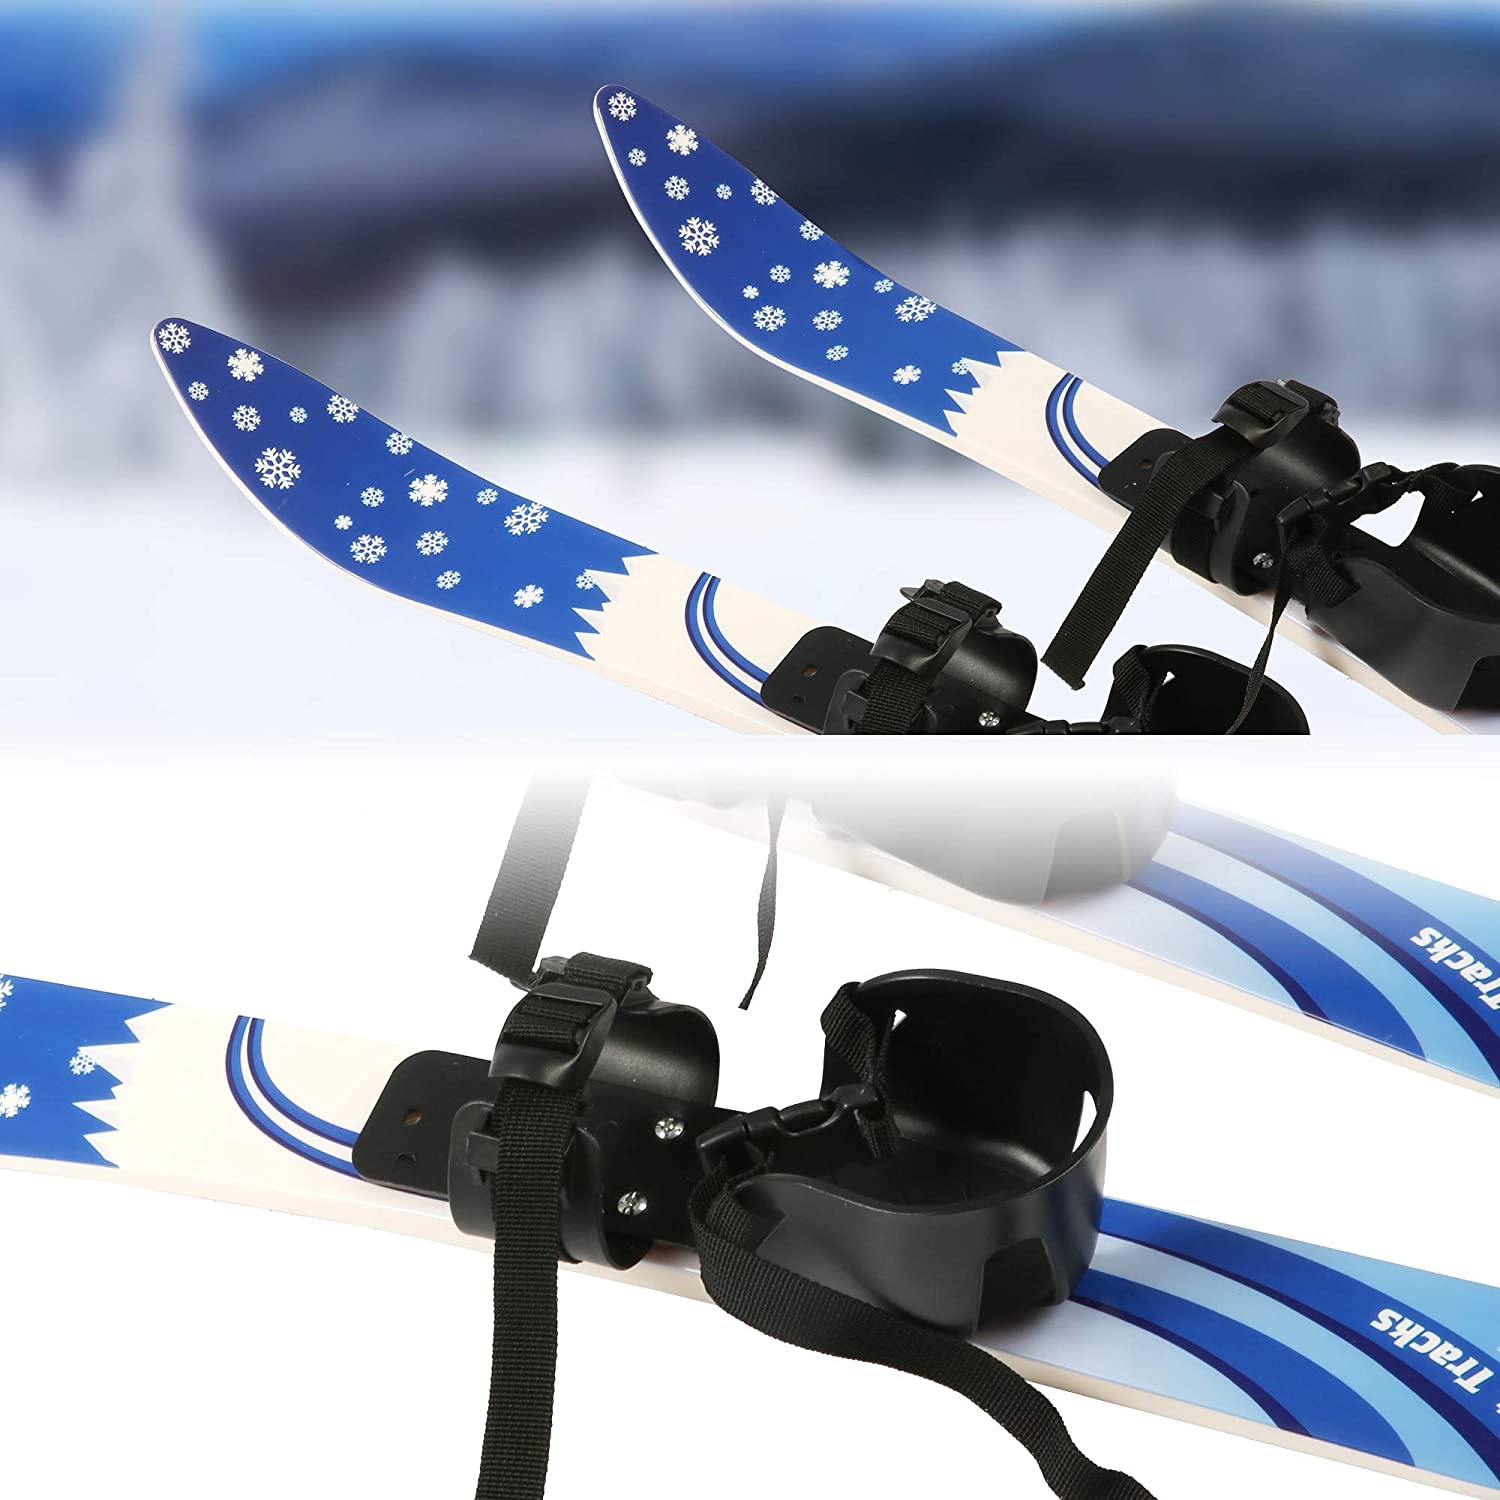 Snow Ski and Pole Set with Bindings 25.6" Ski Boards for Kids Age 2-4 Beginners, Blue